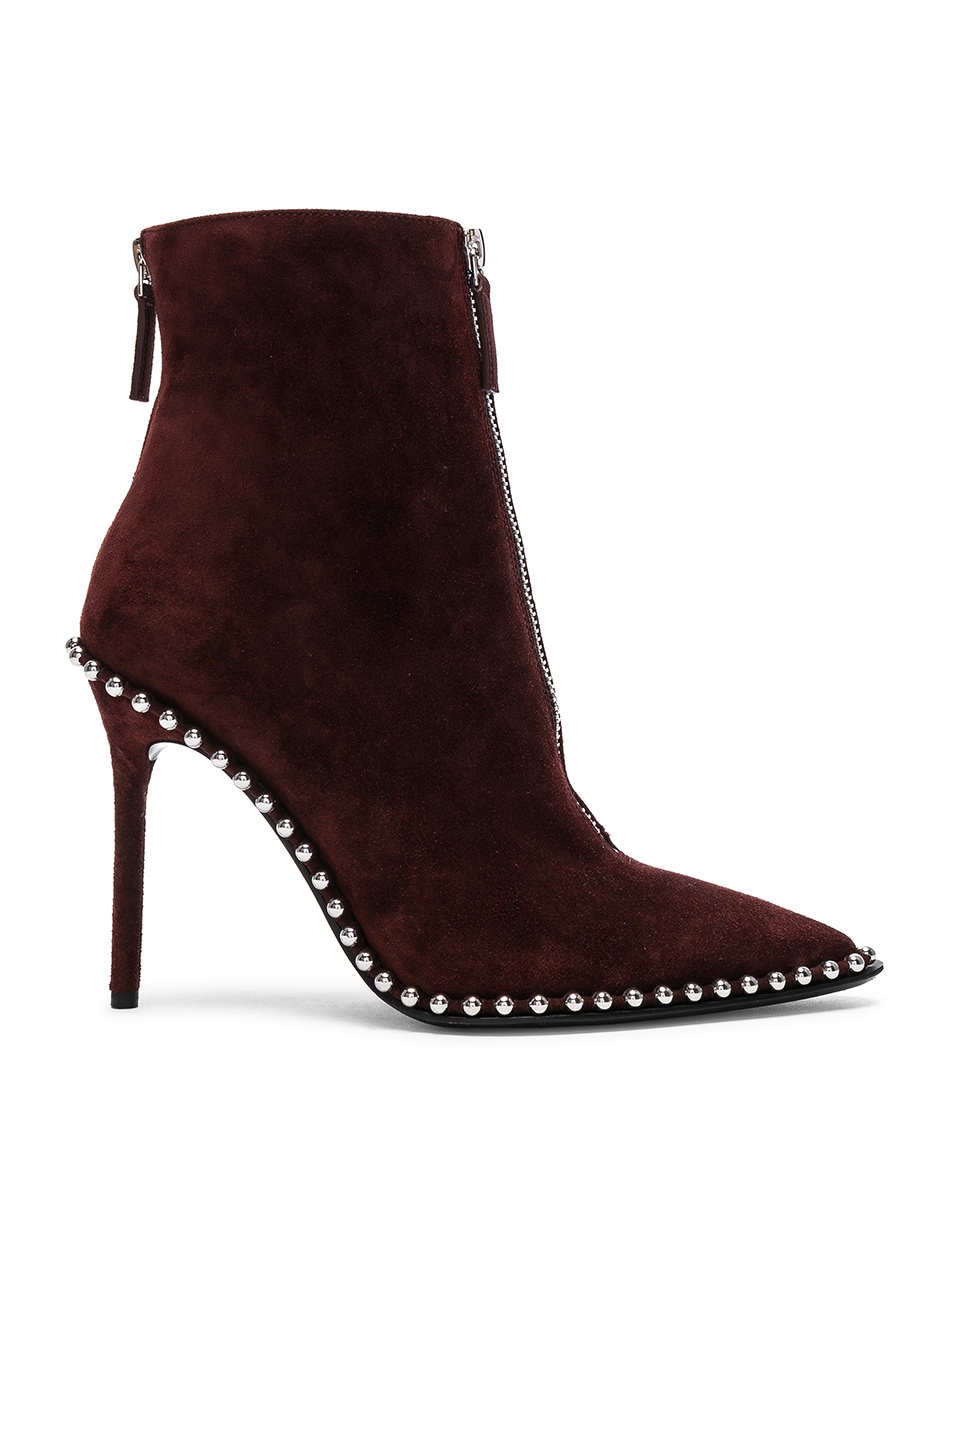 Image 1 of Alexander Wang Suede Eri Boots in Cranberry